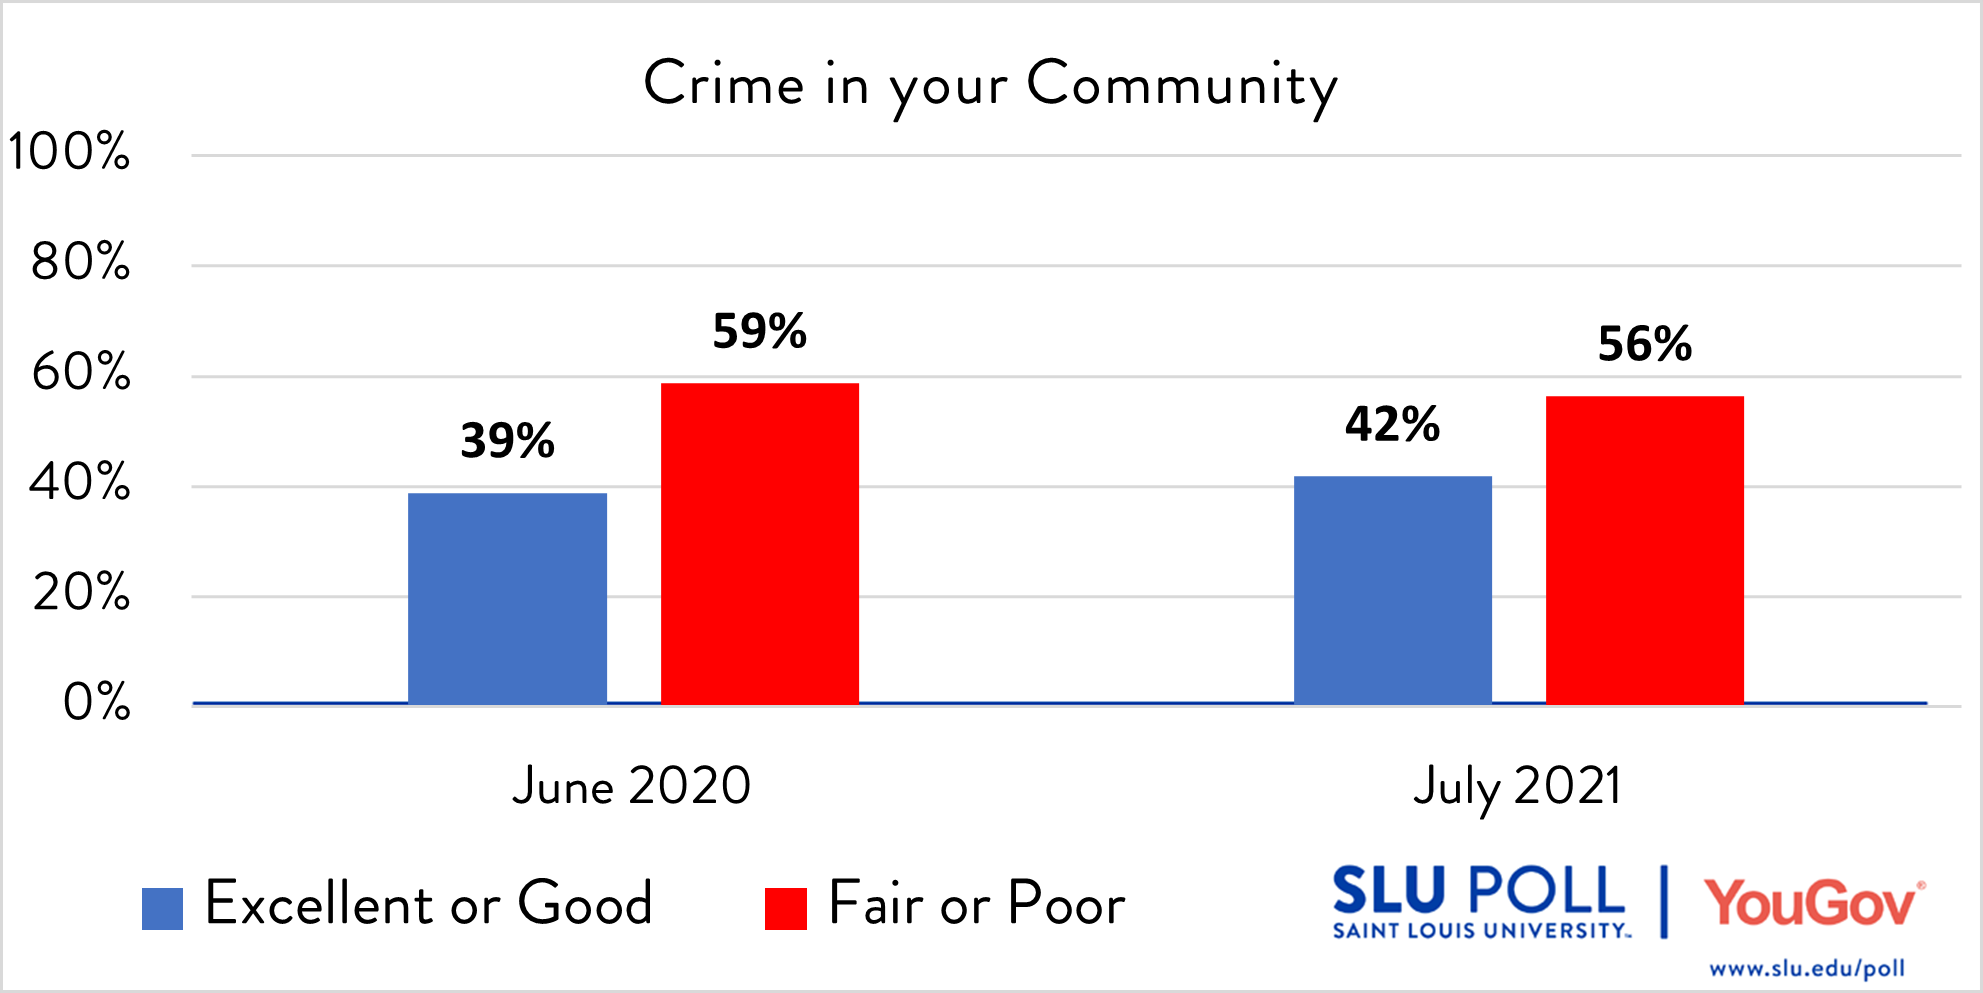 How would you rate the following…Crime in your community? - Excellent: 8% - Good: 34% - Fair: 32% - Poor: 24% - Not sure: 2% Subsample Question: The sample size for this question is 473. The margin of error for the full results for the above question is ± 5.81%.